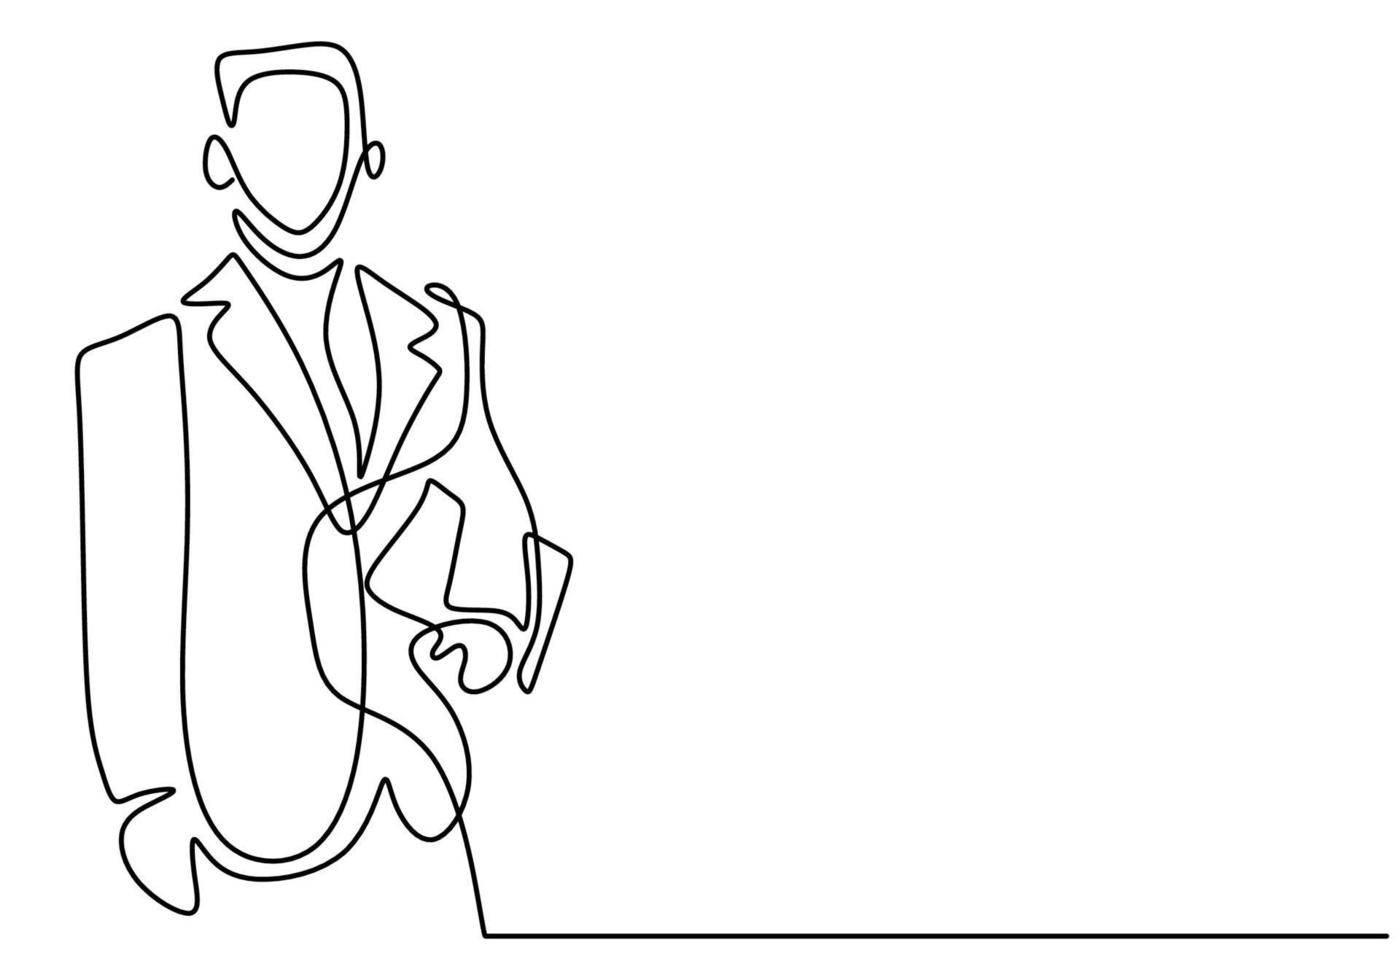 One continuous single line drawing of young businessman stand up and carrying laptop or tablet smartphone on his hand isolated on white background. Business service excellence concept vector